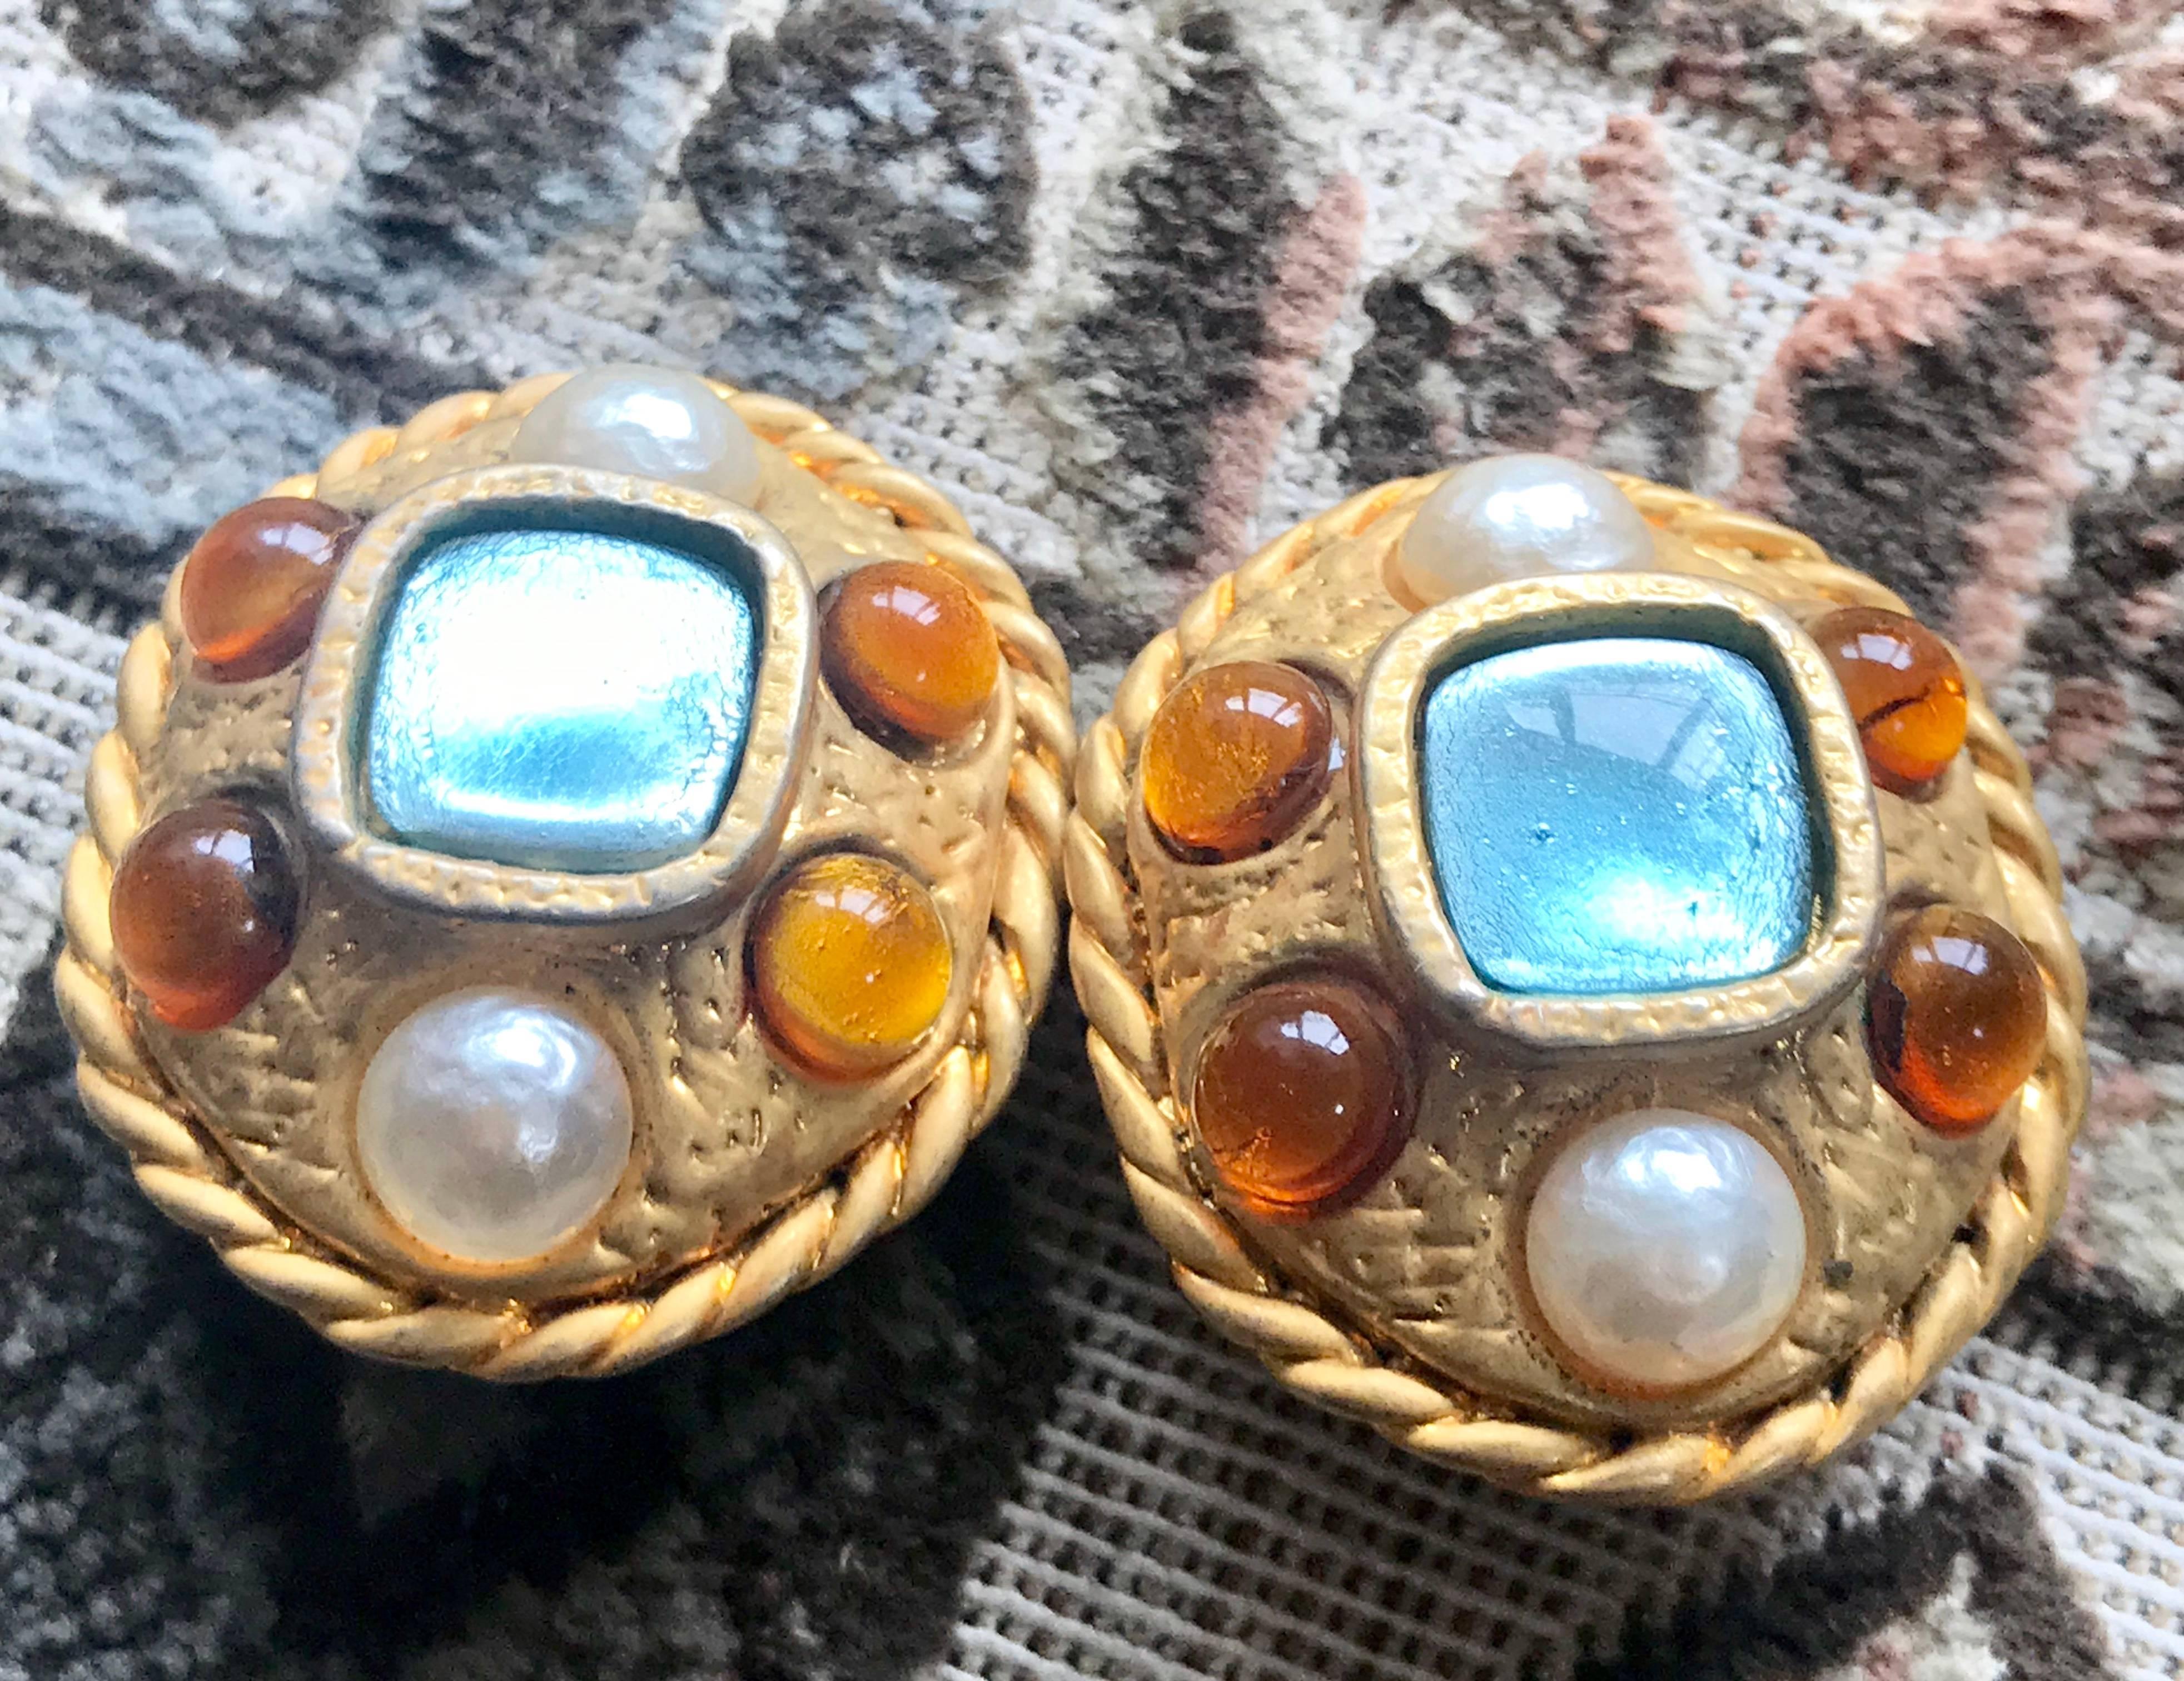 1990s. Vintage CHANEL golden oval faux pearl, light blue and orange gripoix jewel stone extra large earrings. Masterpiece jewelry.

Fun and Chic and Gorgeous CHANEL earrings for  you or your loved one!  
Great gift idea. 

Introducing large unique